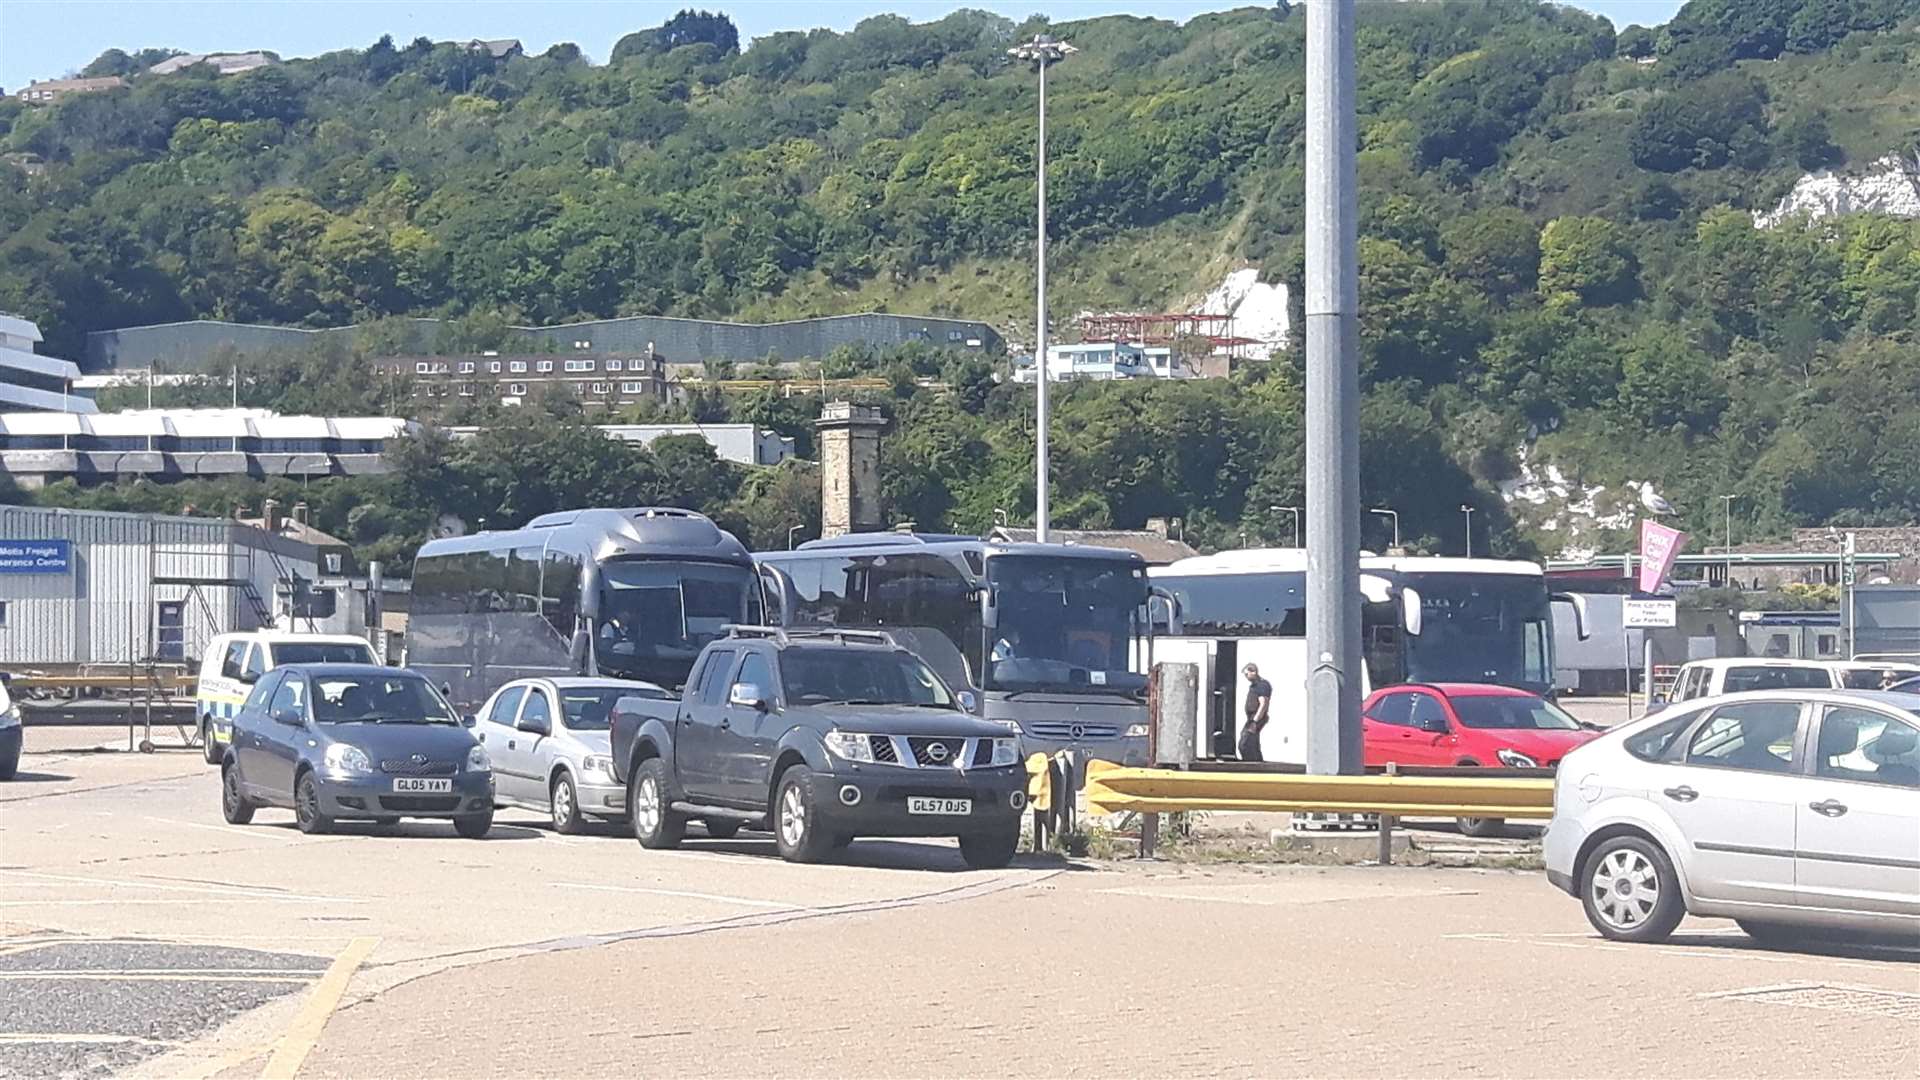 Coaches containing migrants brought ashore this morning